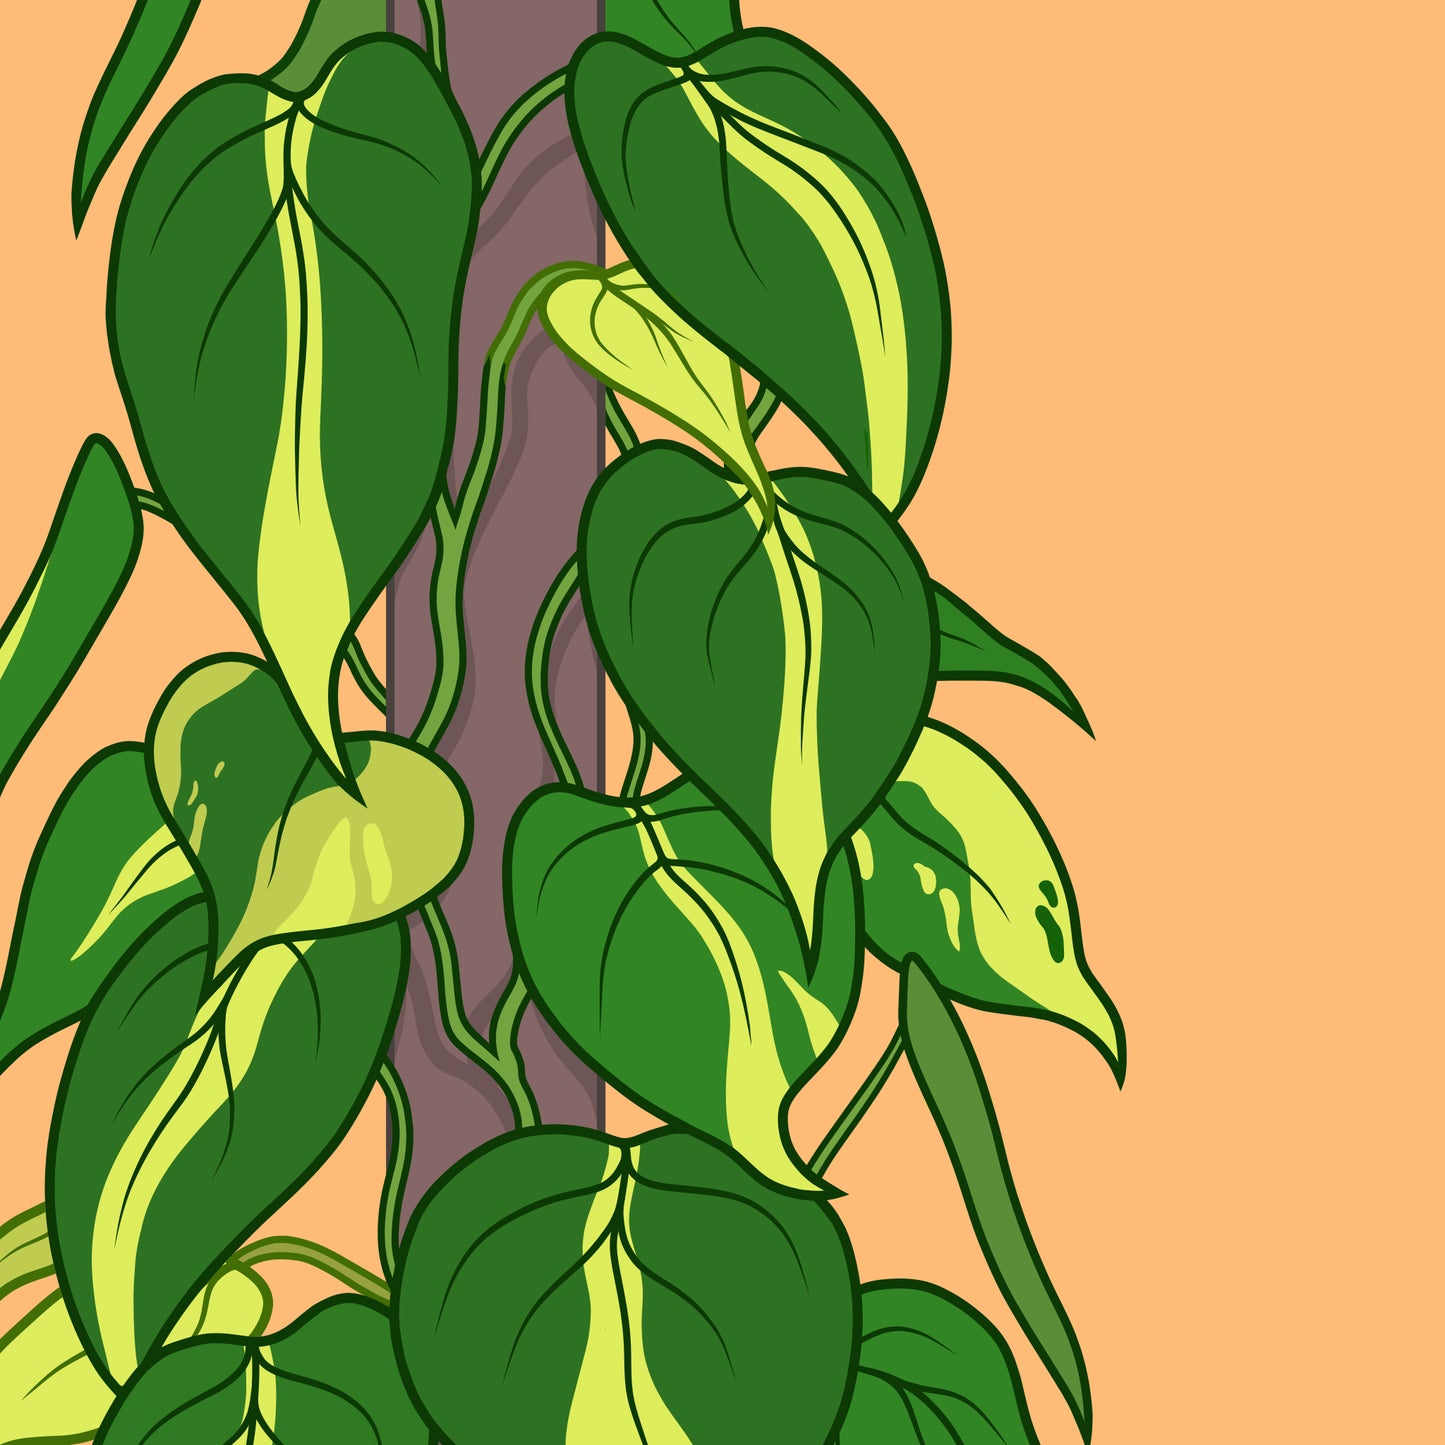 philodendron brasil leaves digitally illustrated houseplant art print close up